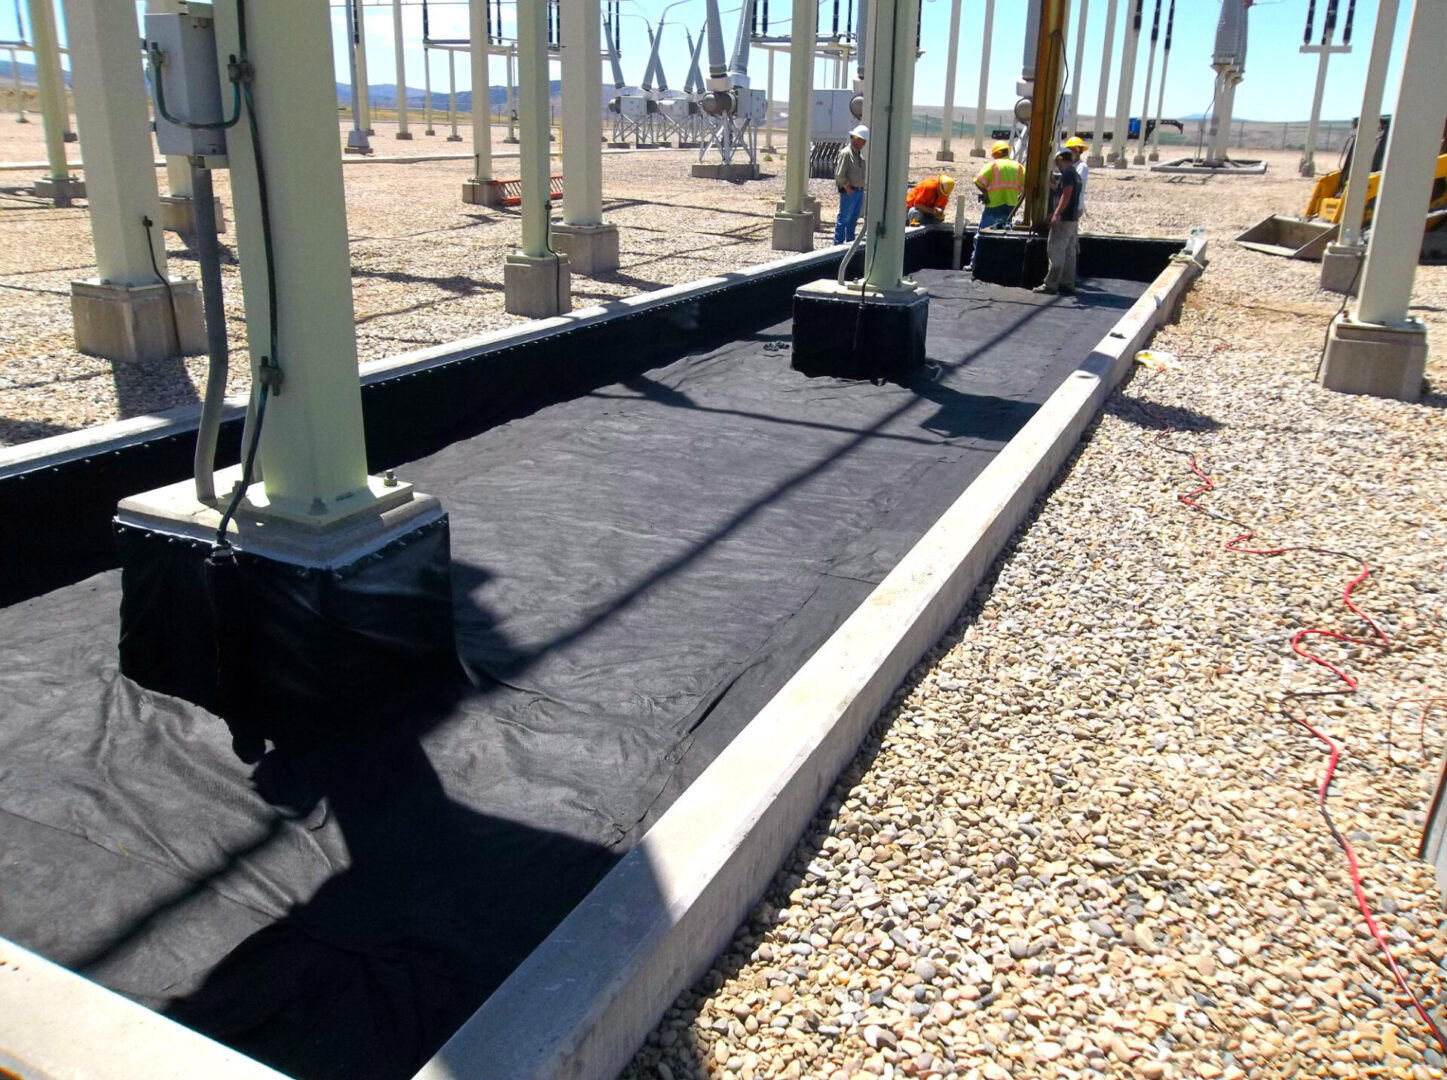 A walkway with black fabric on the ground.